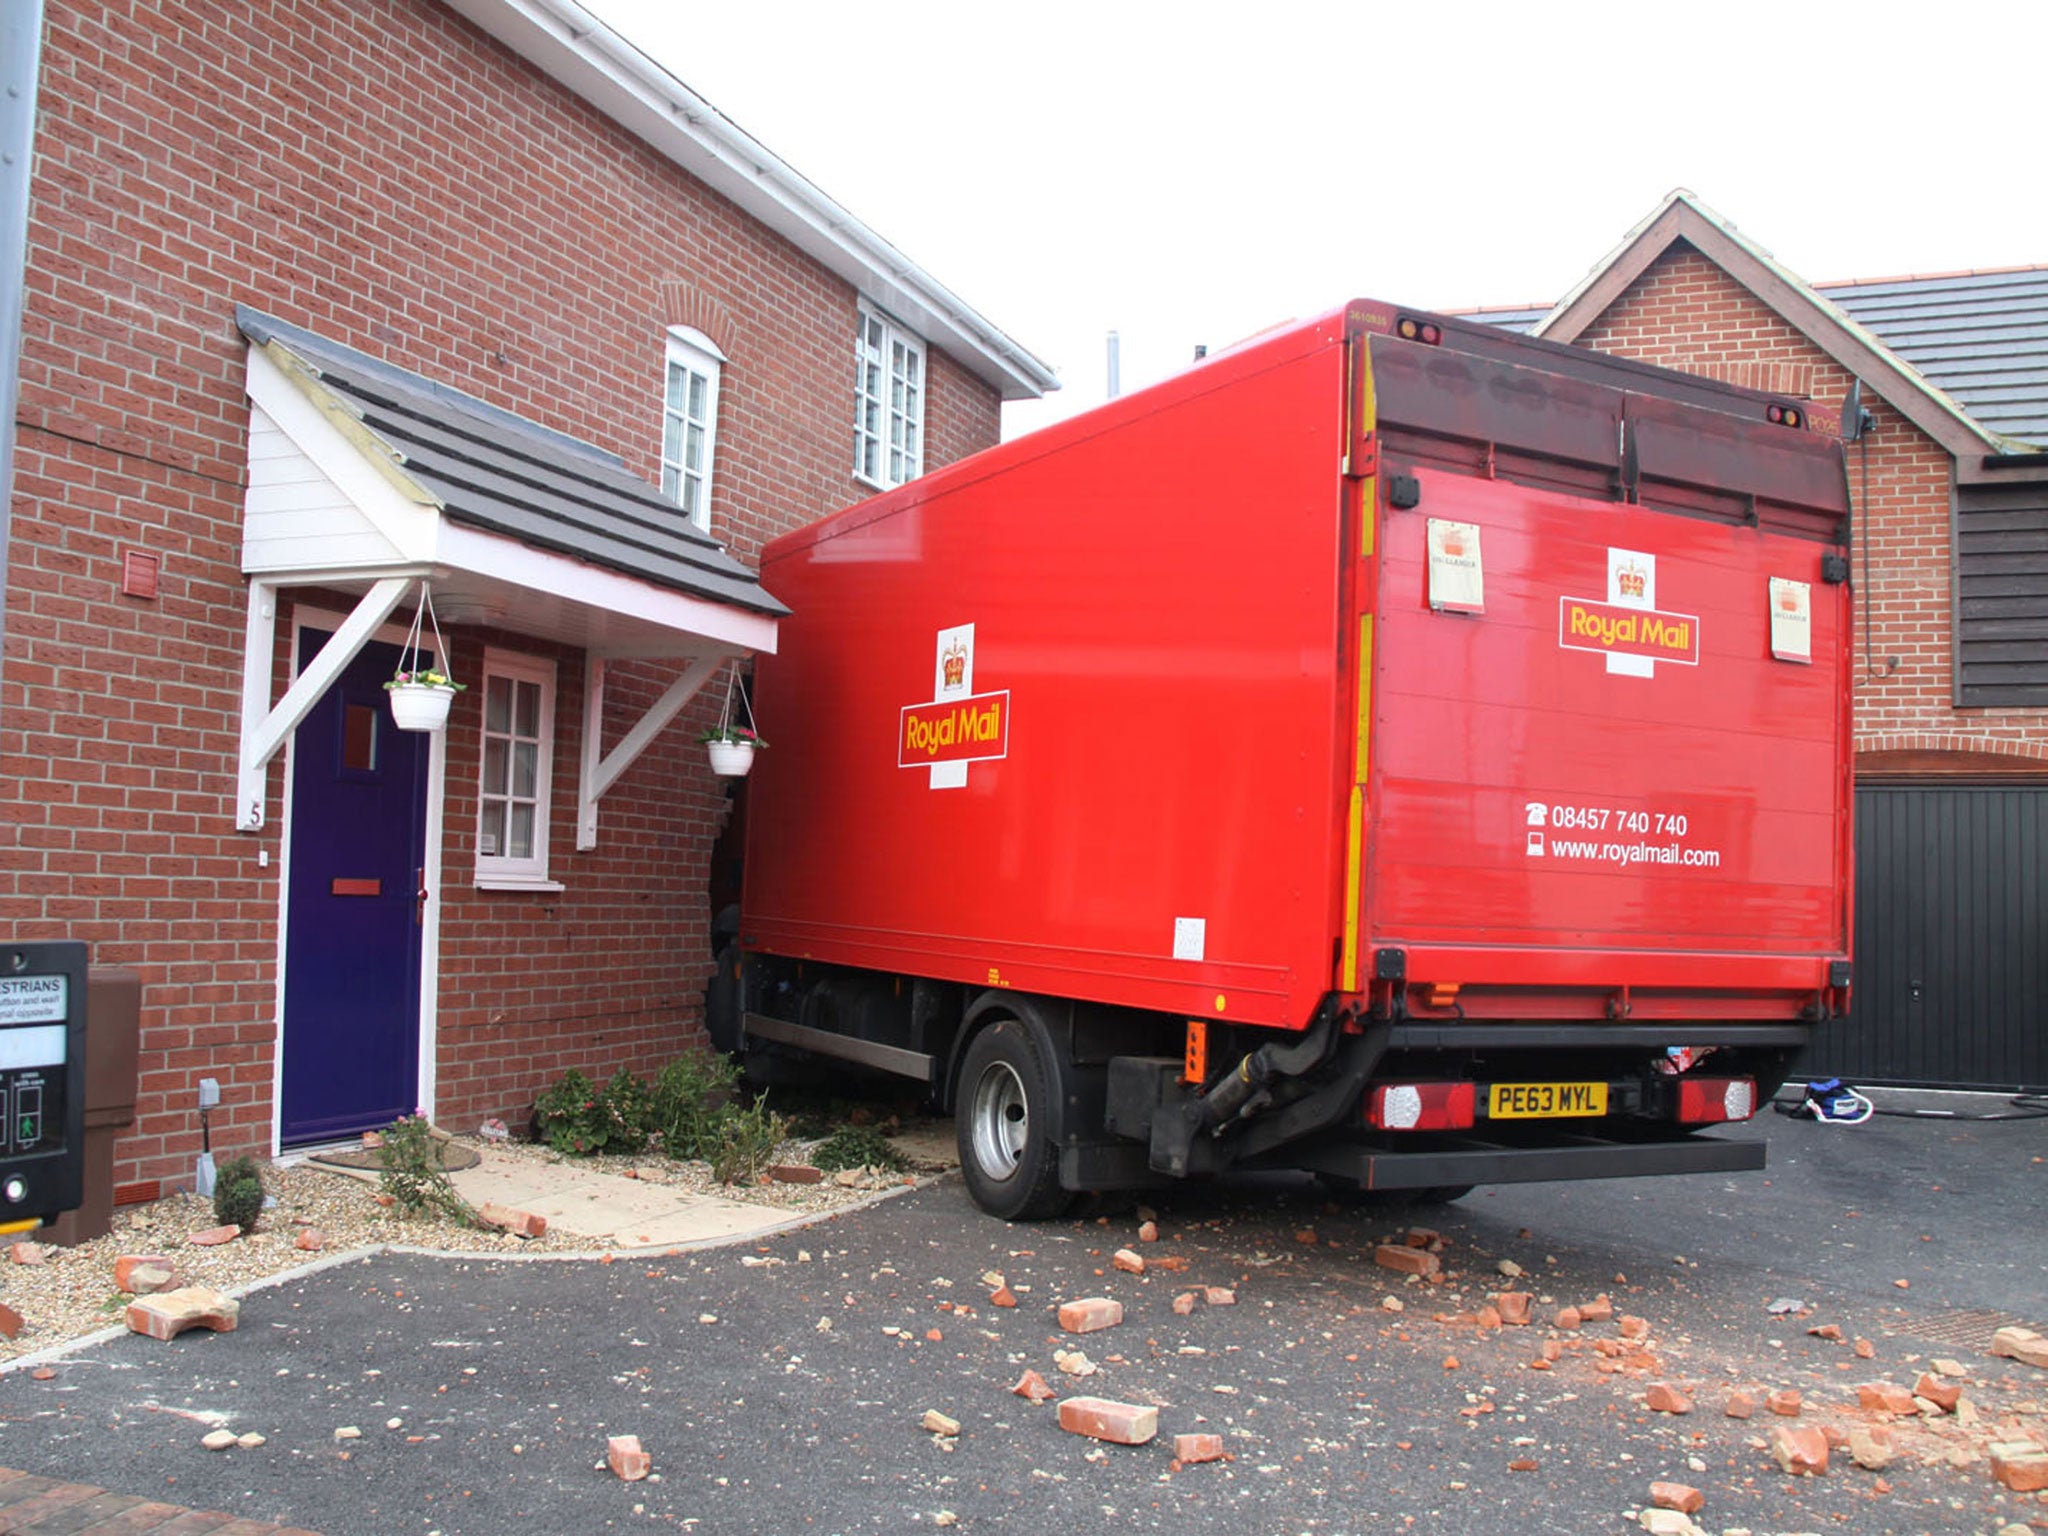 Handout photo dated 20/03/14 issued by Hampshire Fire and Rescue Service of a 7.5 tonne Royal Mail lorry that has crashed into the side of a house in Gosport